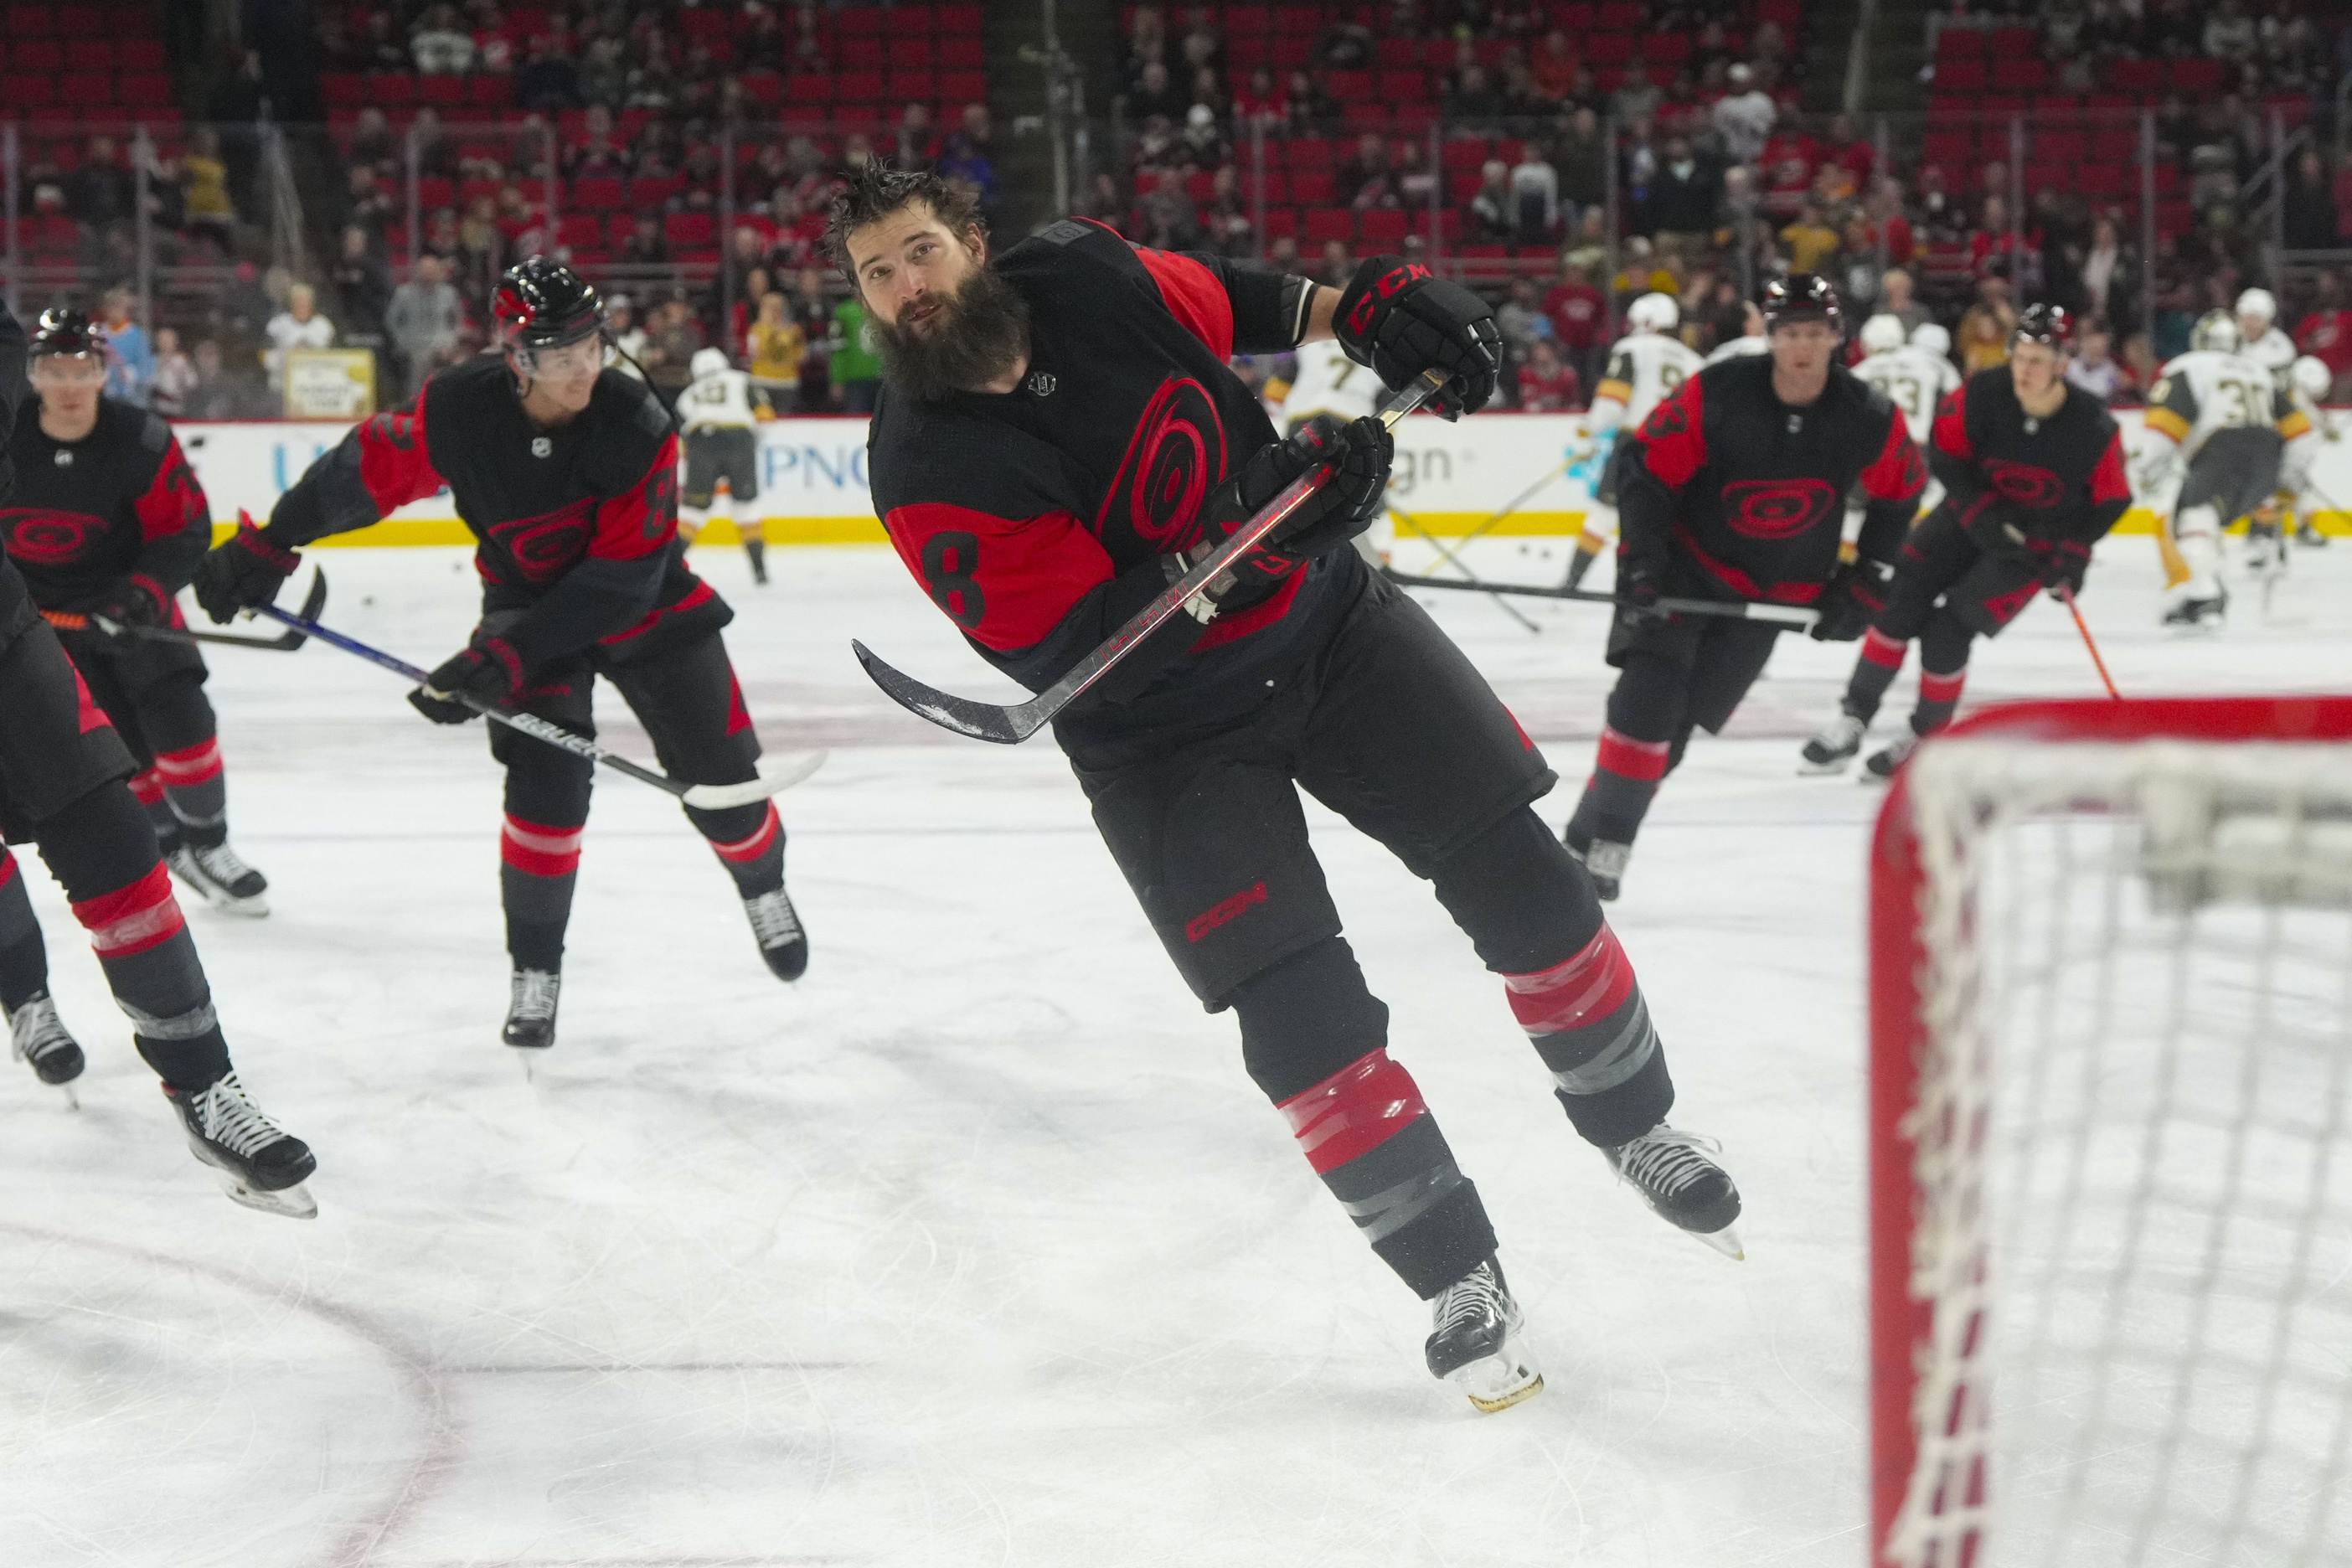 Carolina Hurricanes vs New Jersey Devils: Preview, Game Notes